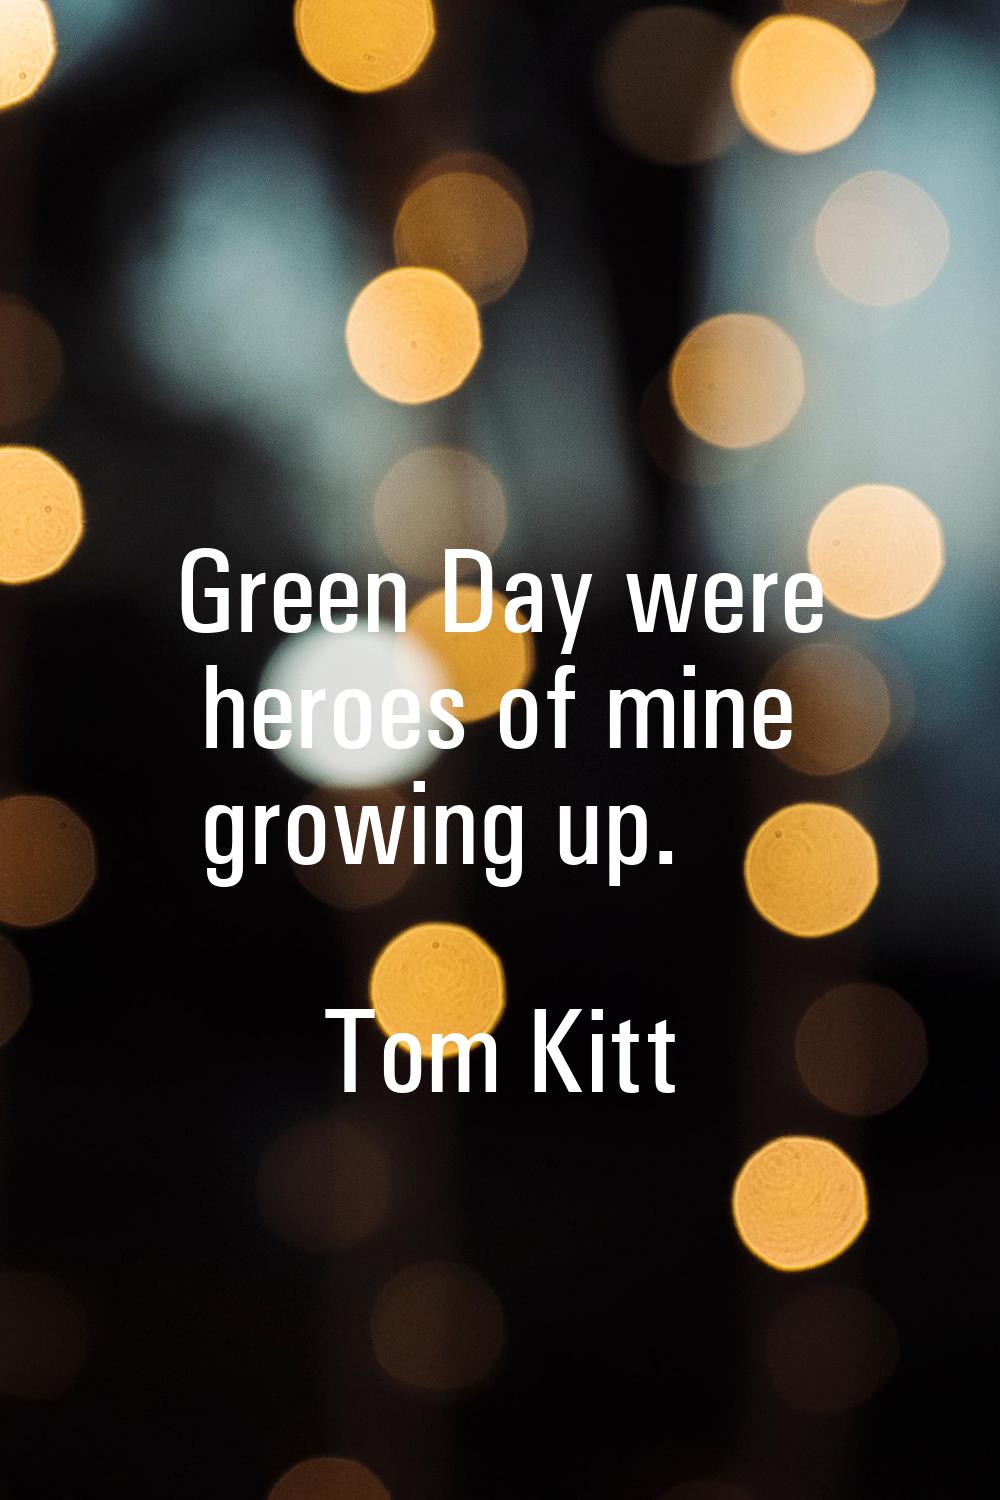 Green Day were heroes of mine growing up.